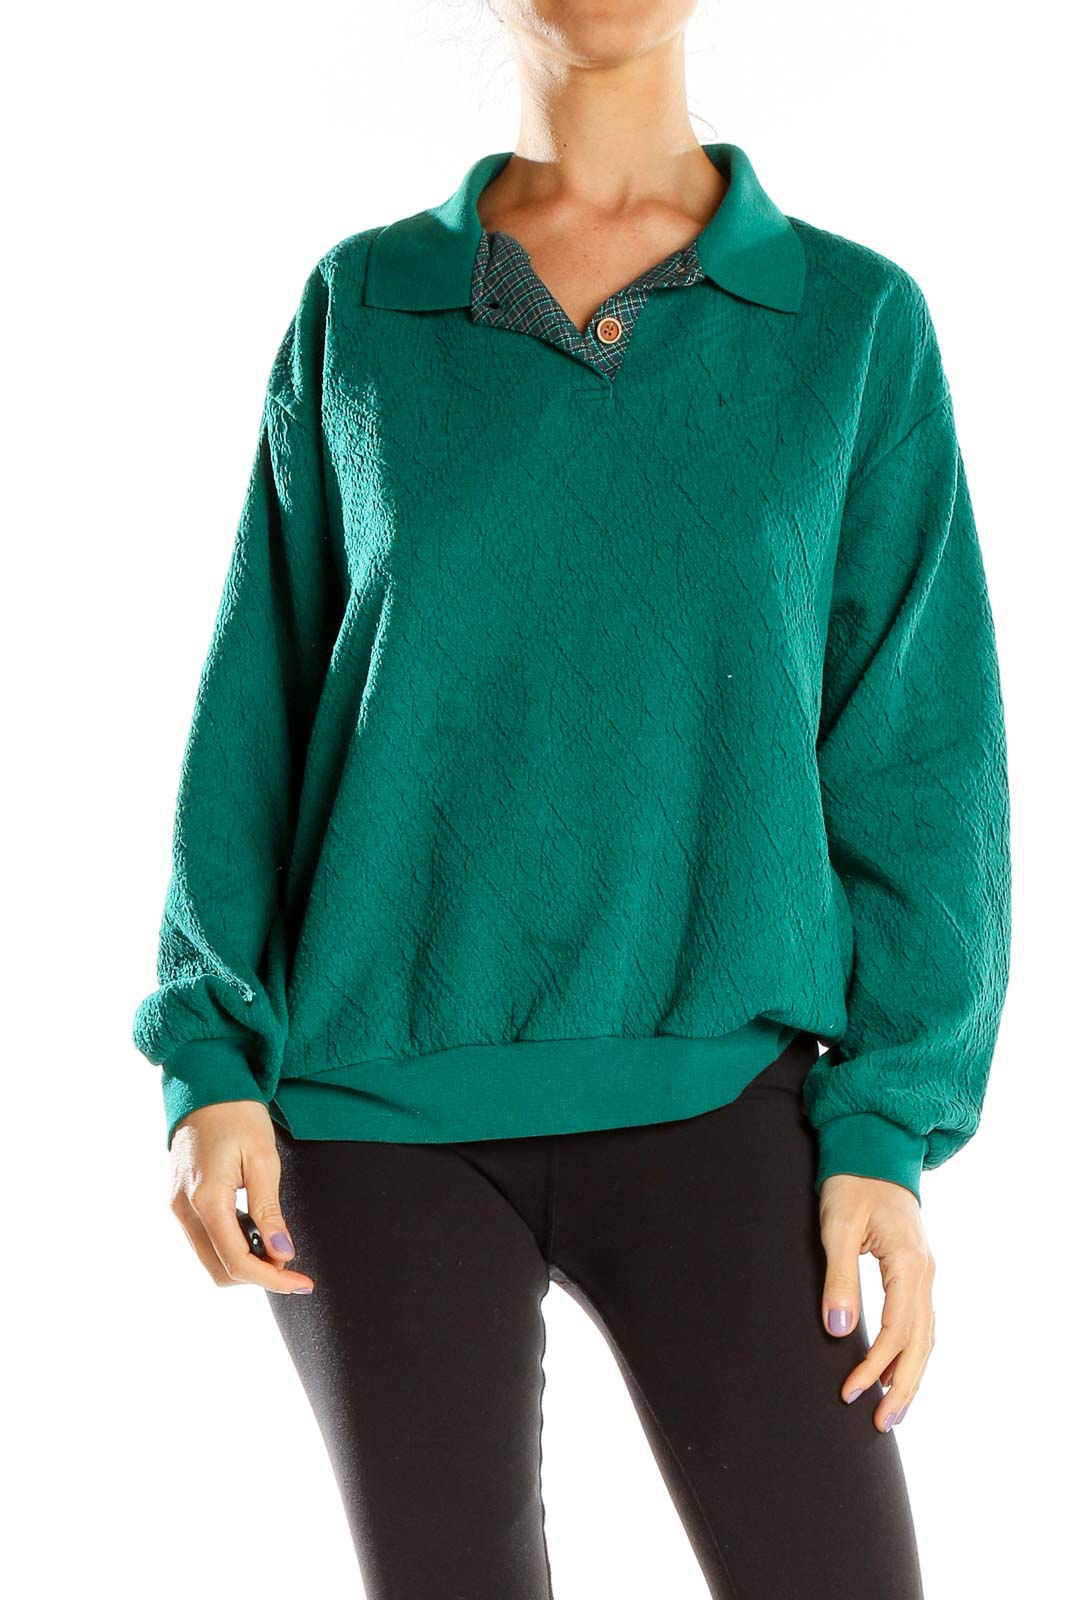 Green Textured Vintage Sweater Front